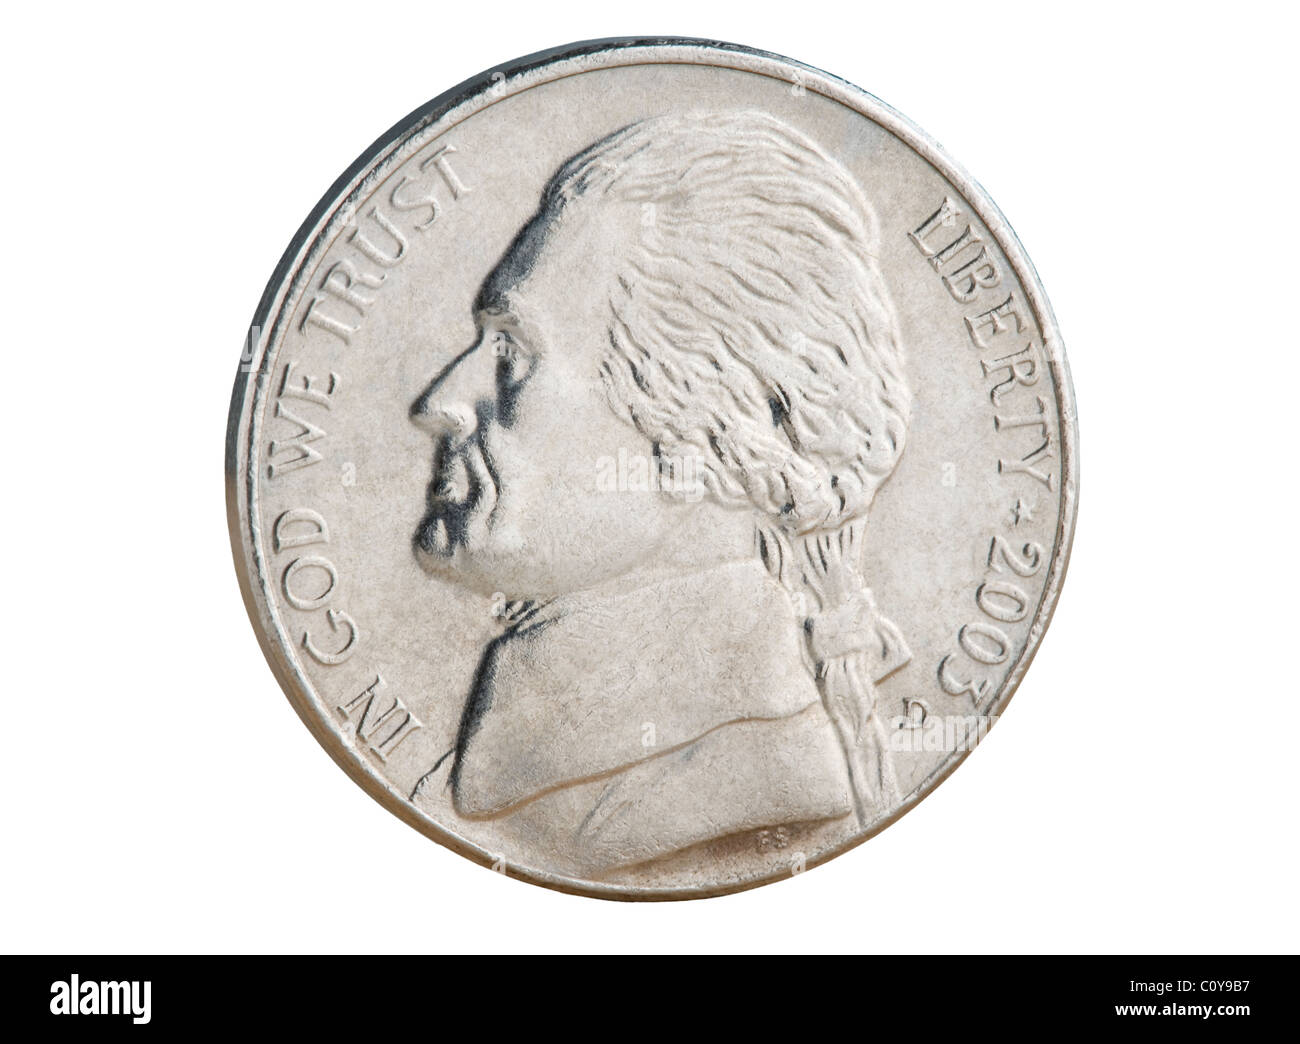 2010 US nickel coin. The face value of 5 cents is now less than the value of the metals in the coin. Stock Photo